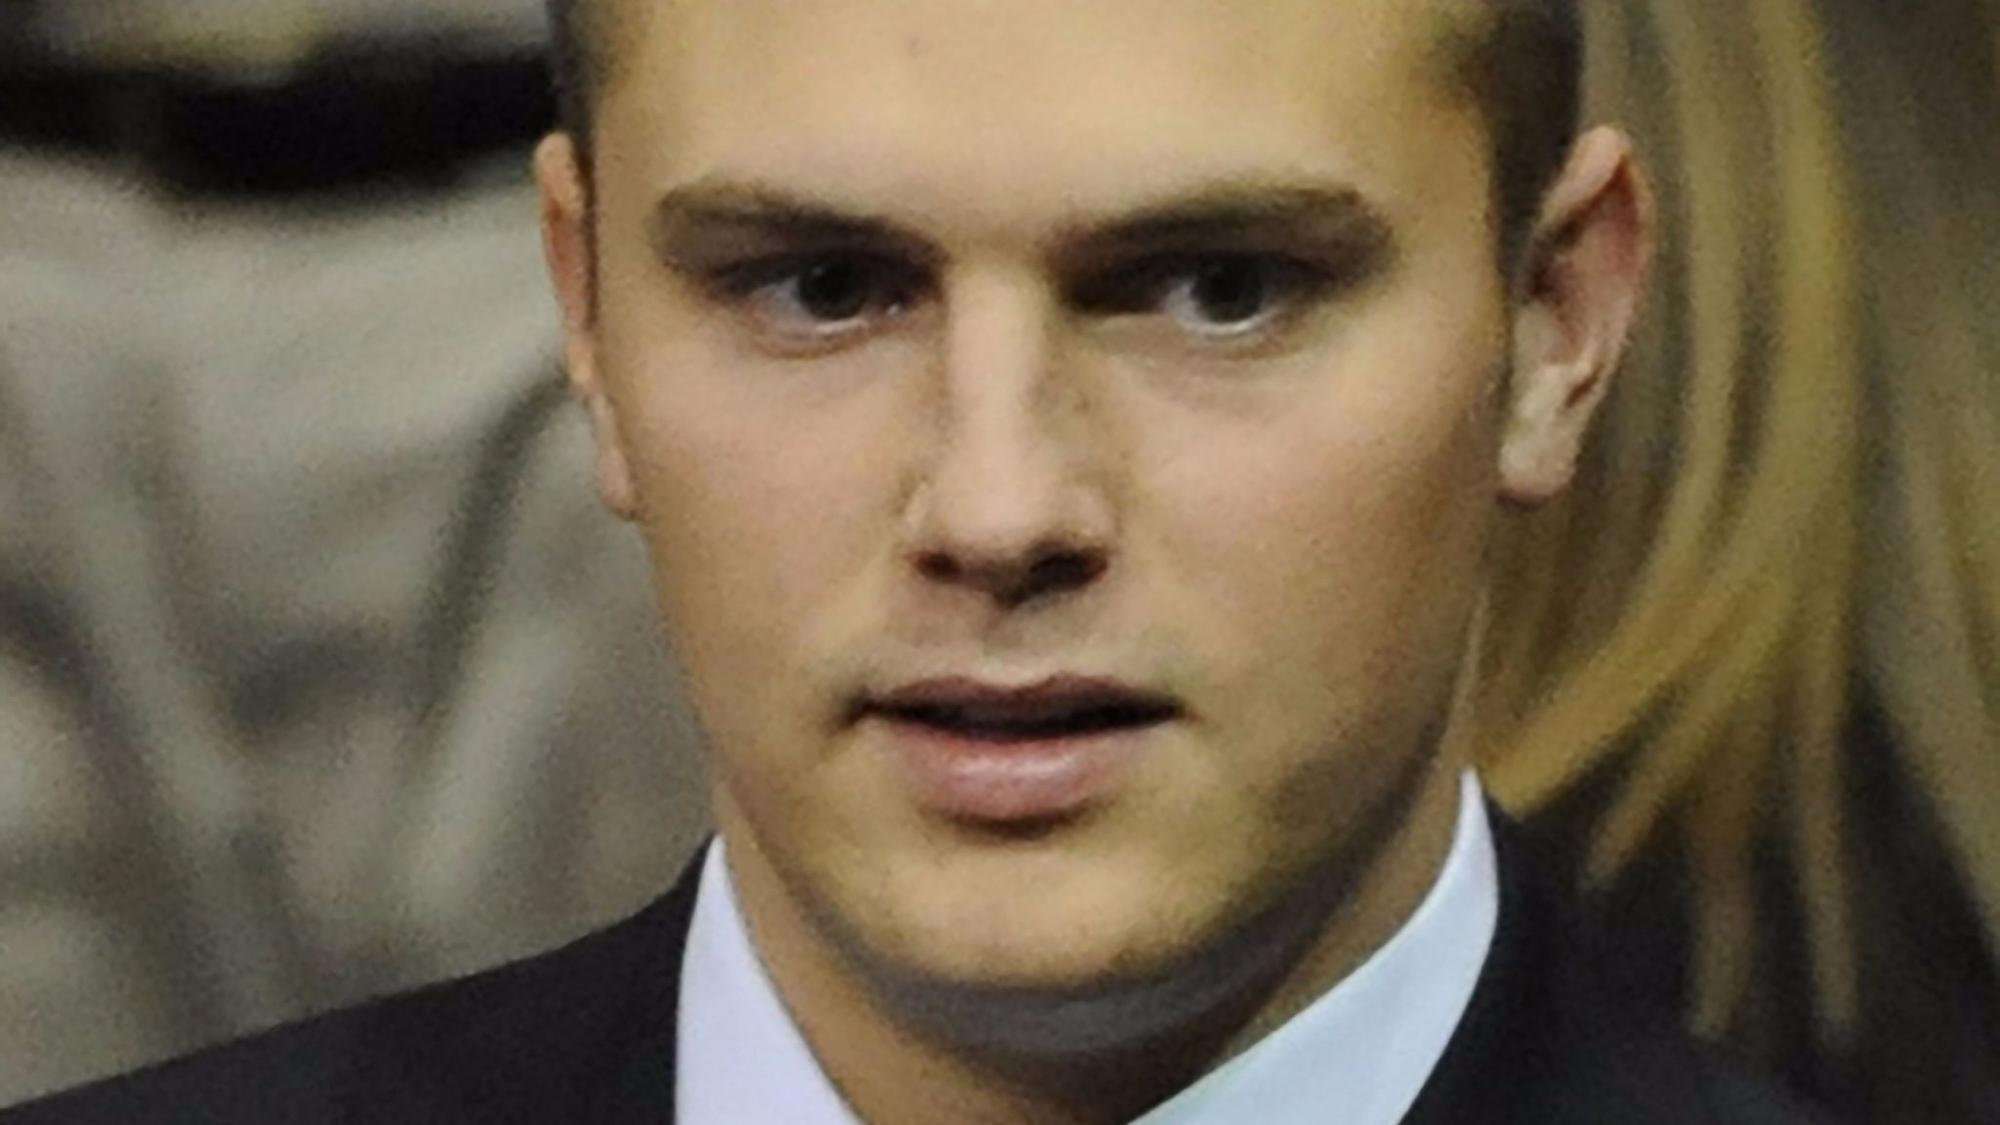 image for Sarah Palin's oldest son, Track, arrested on domestic violence charges